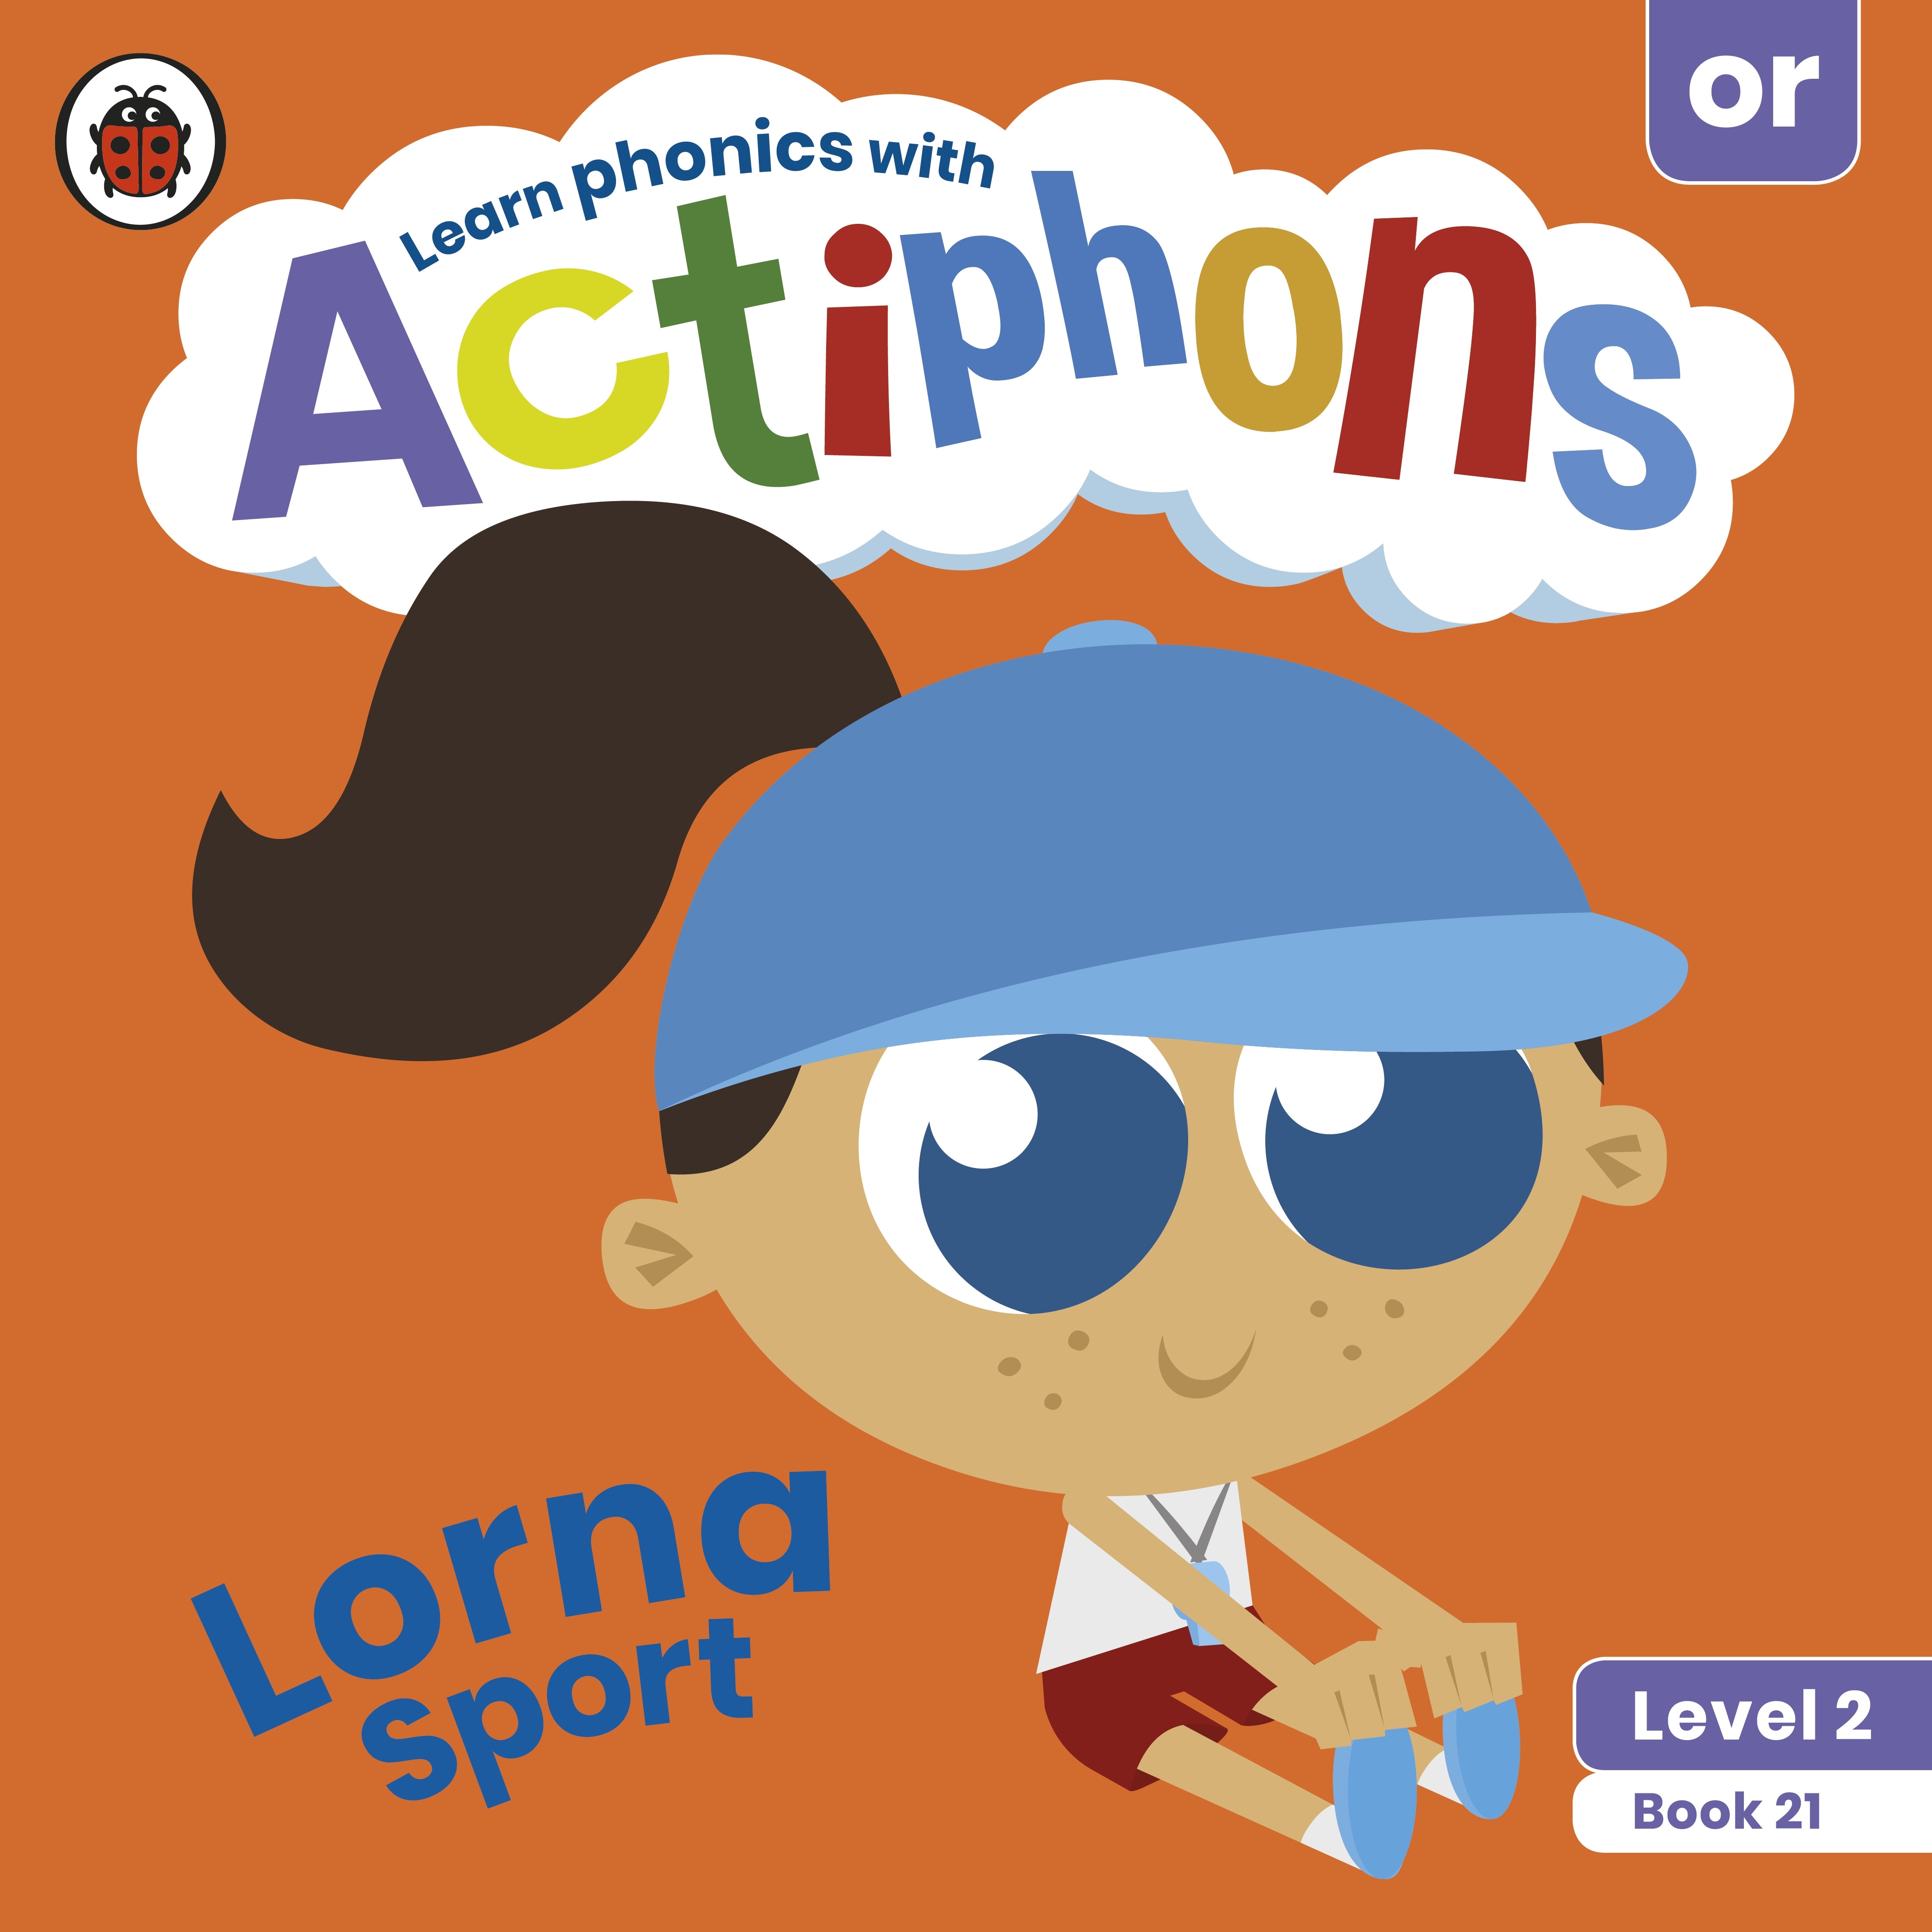 Actiphons Level 2 Book 21 Lorna Sport